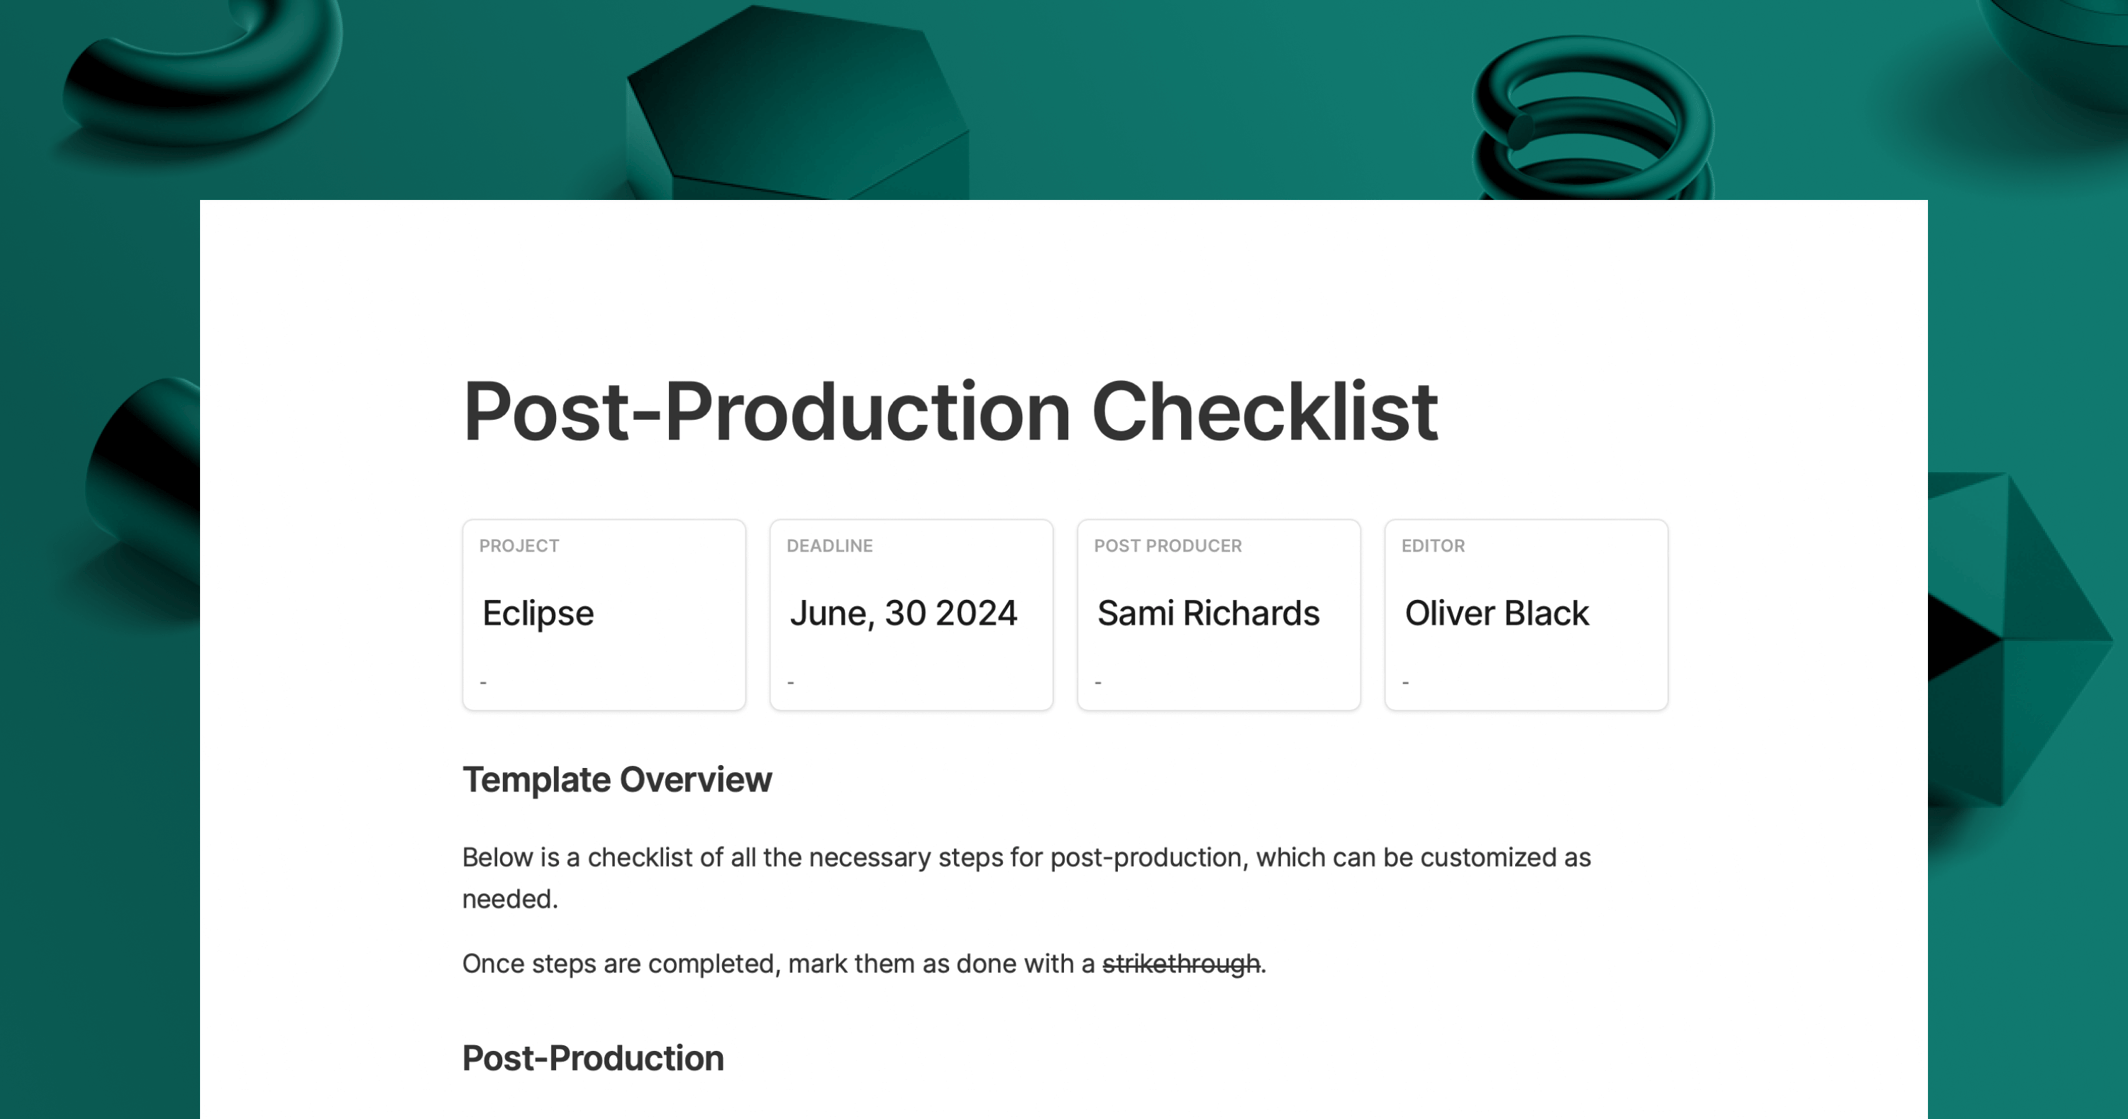 https://3389140.fs1.hubspotusercontent-na1.net/hubfs/3389140/post%20production%20checklist%20cover-1.png